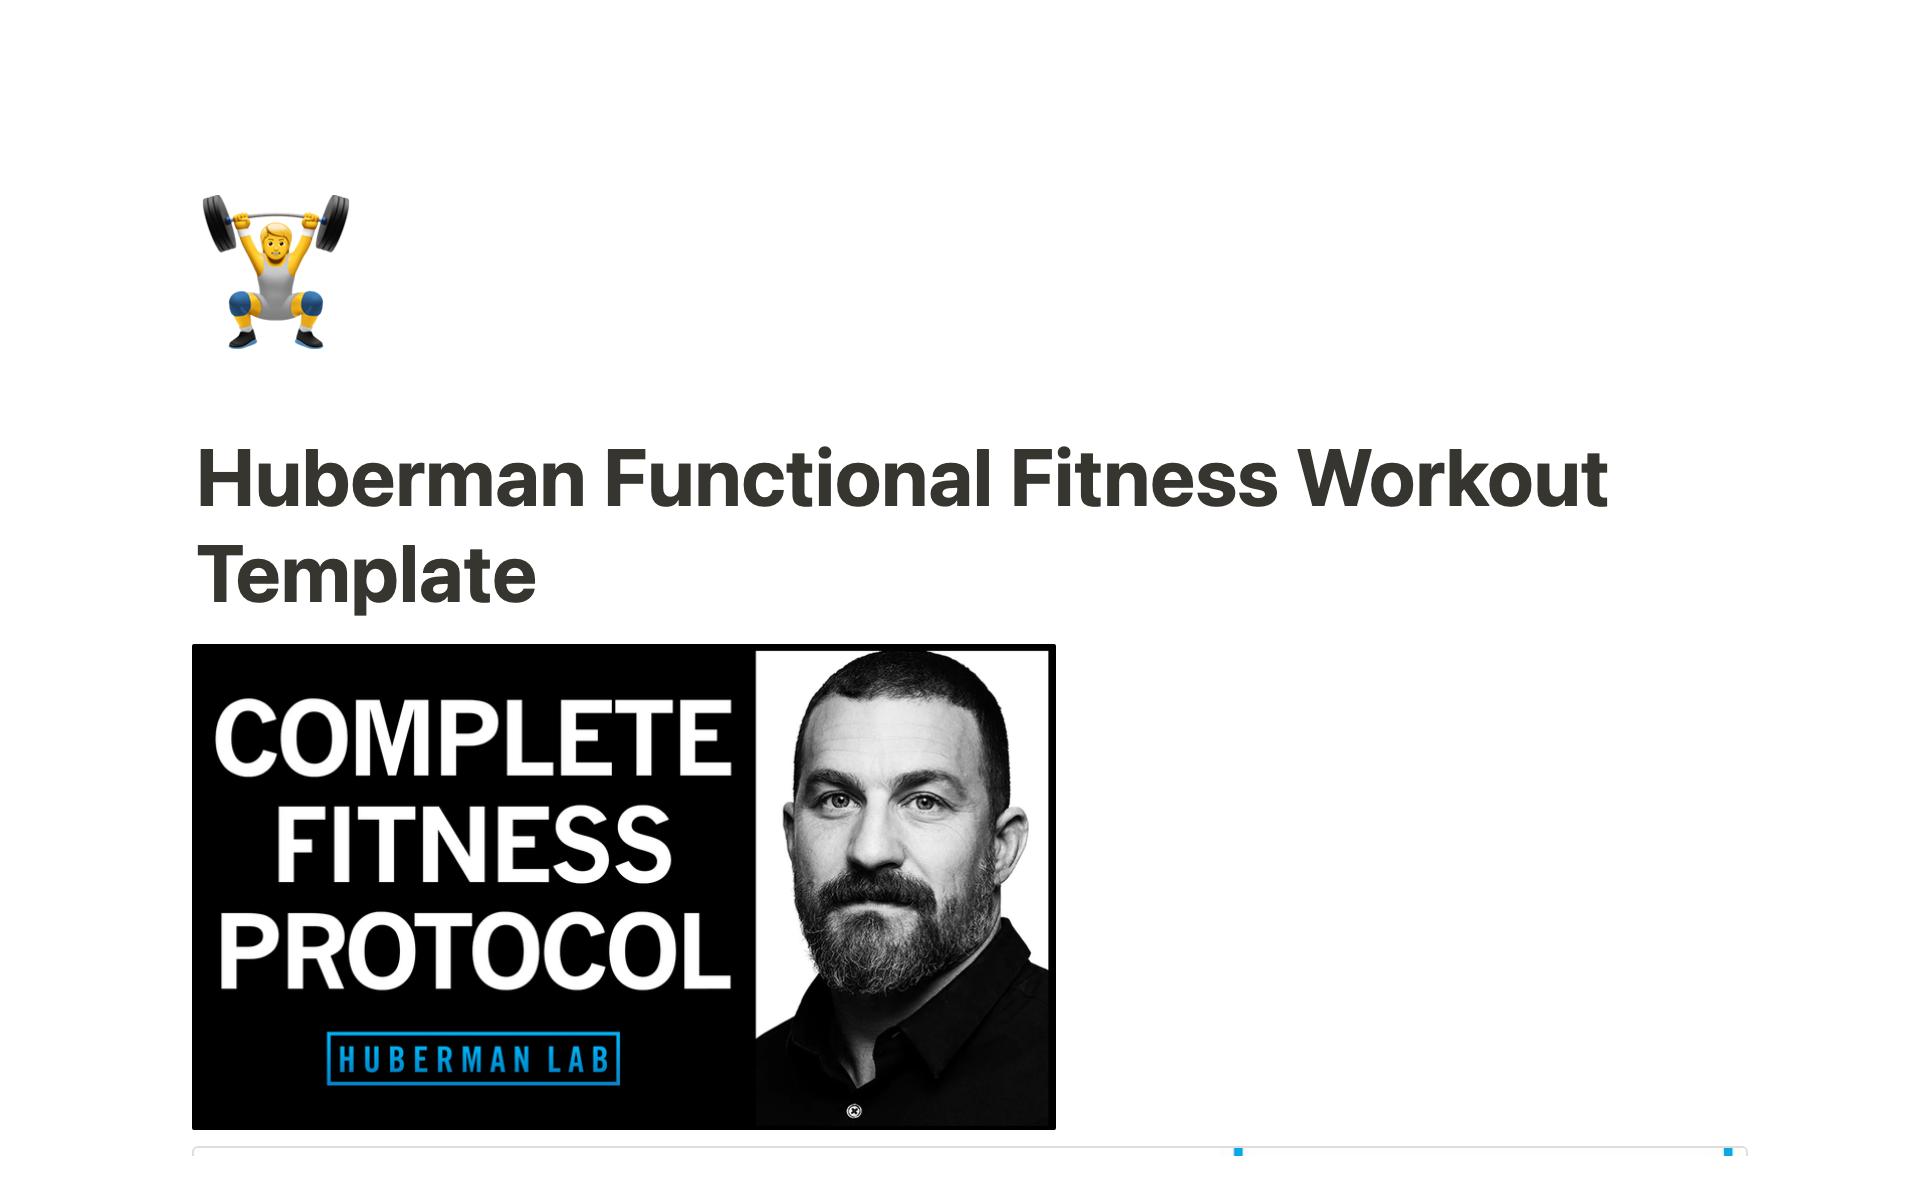 Follow Dr. Huberman's Functional Fitness Protocol with this tracker template.